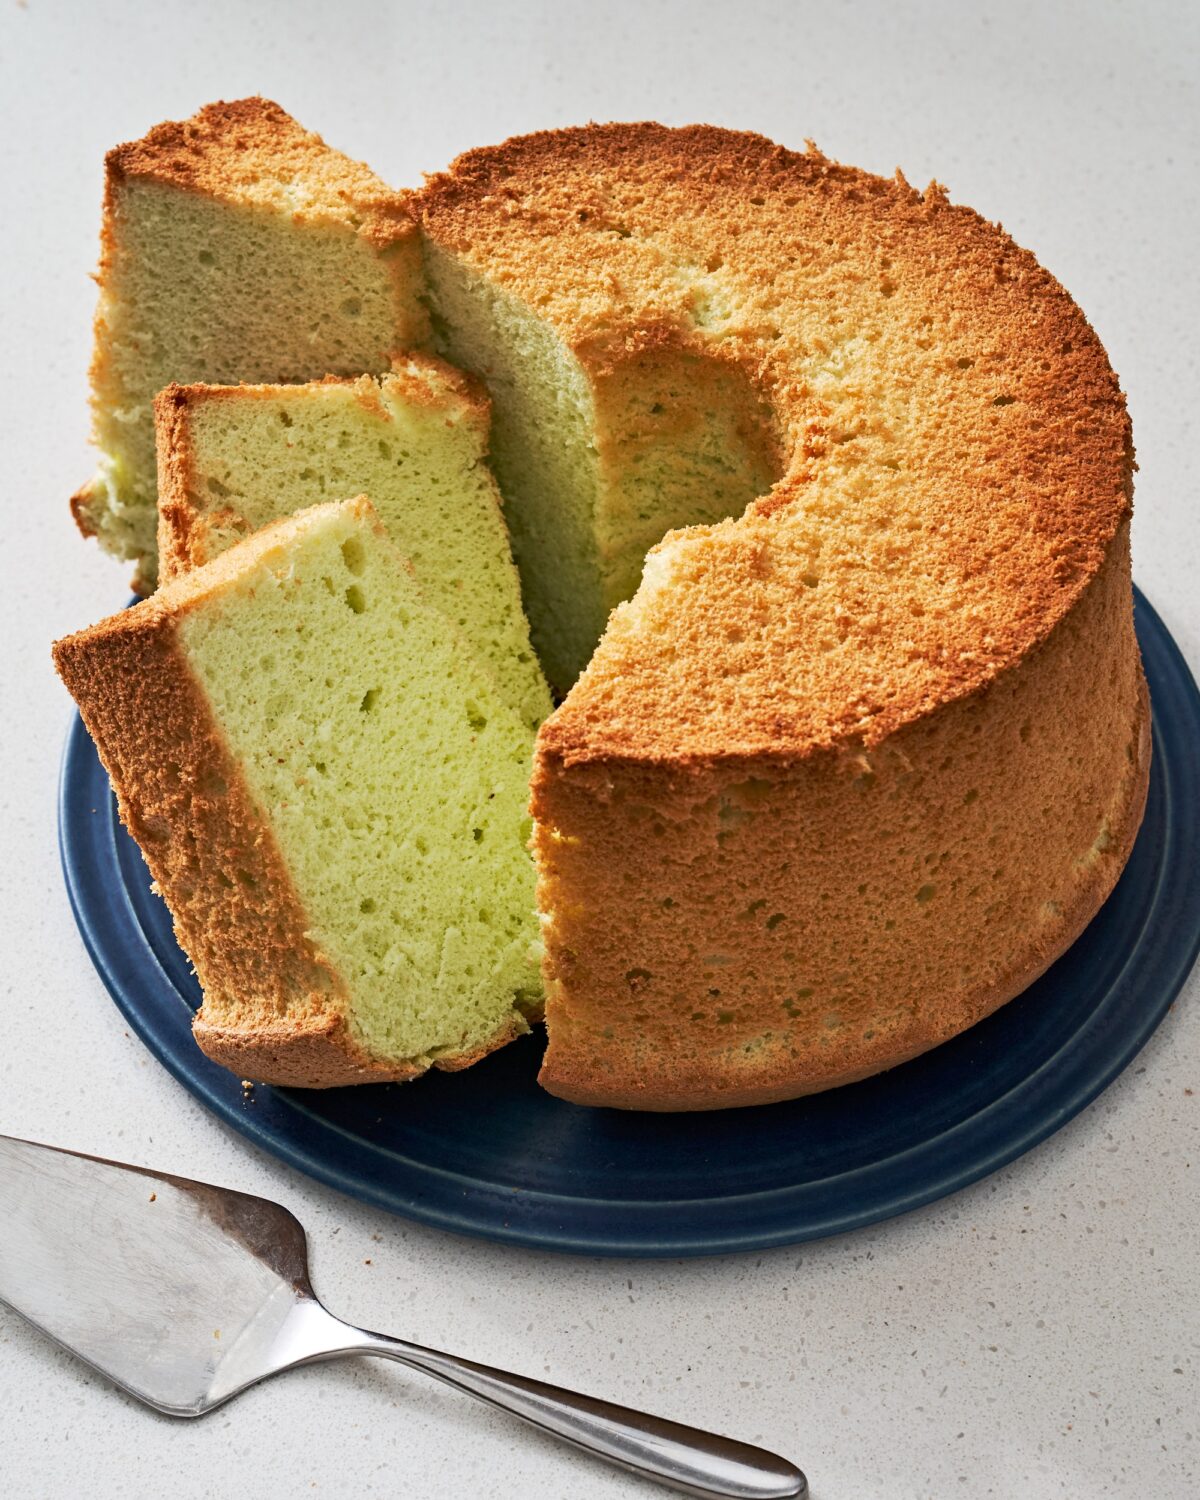 The delicate herbal notes of fresh pandan juice shine in this light and spongy chiffon cake. (Courtesy of TheKitchn.com)